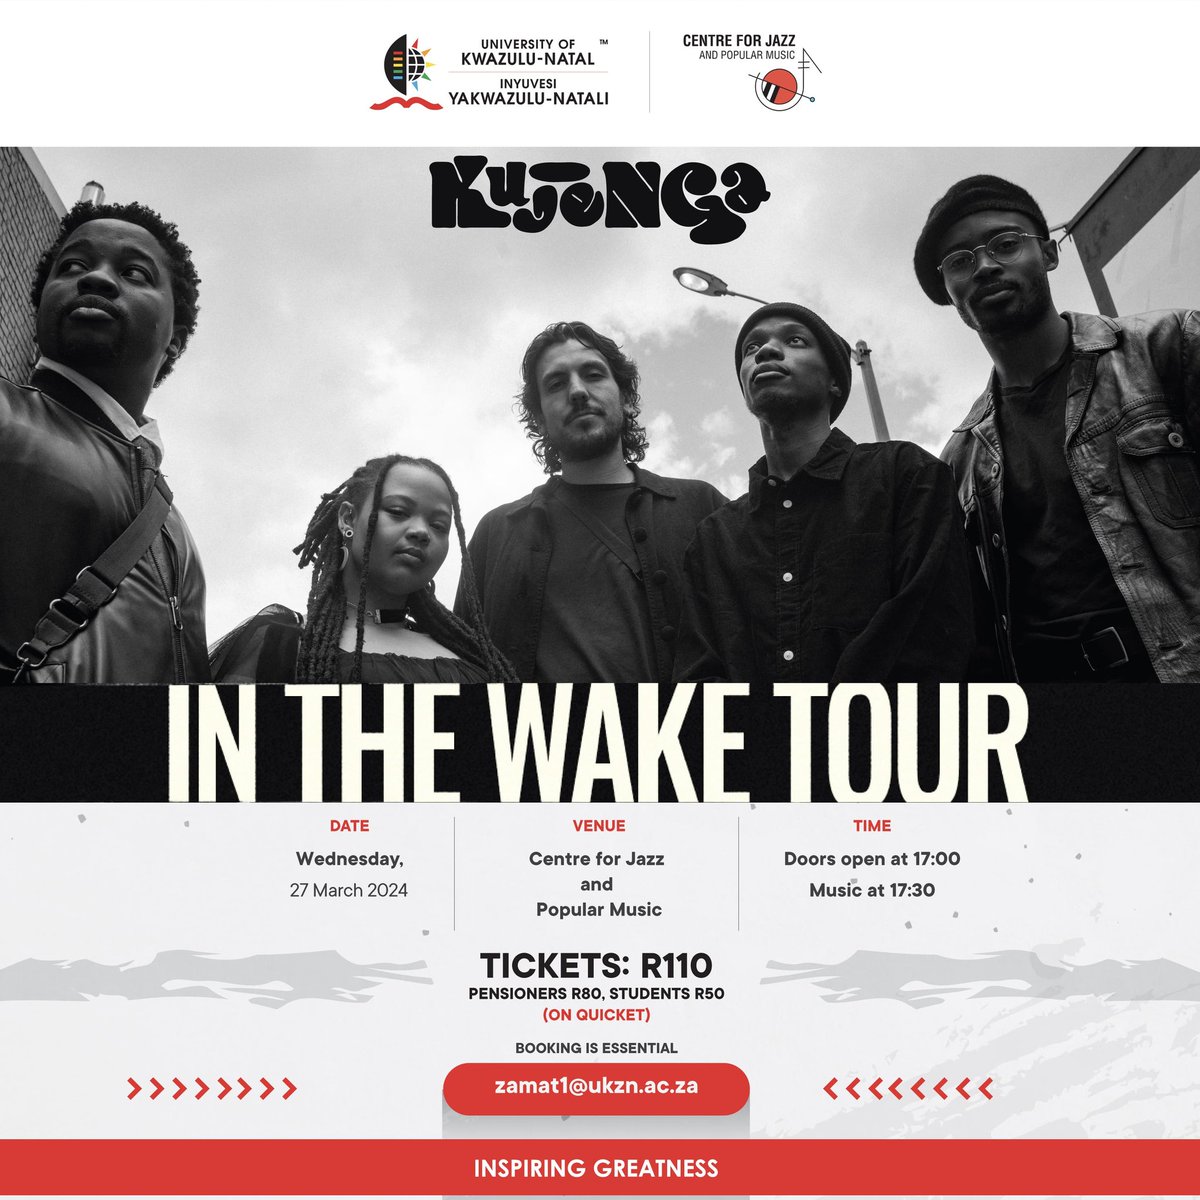 Looking forward to hosting these amazing humans. Catch @KujengaLiveSA live in Durban for their Sophomore album 'In the wake' tour